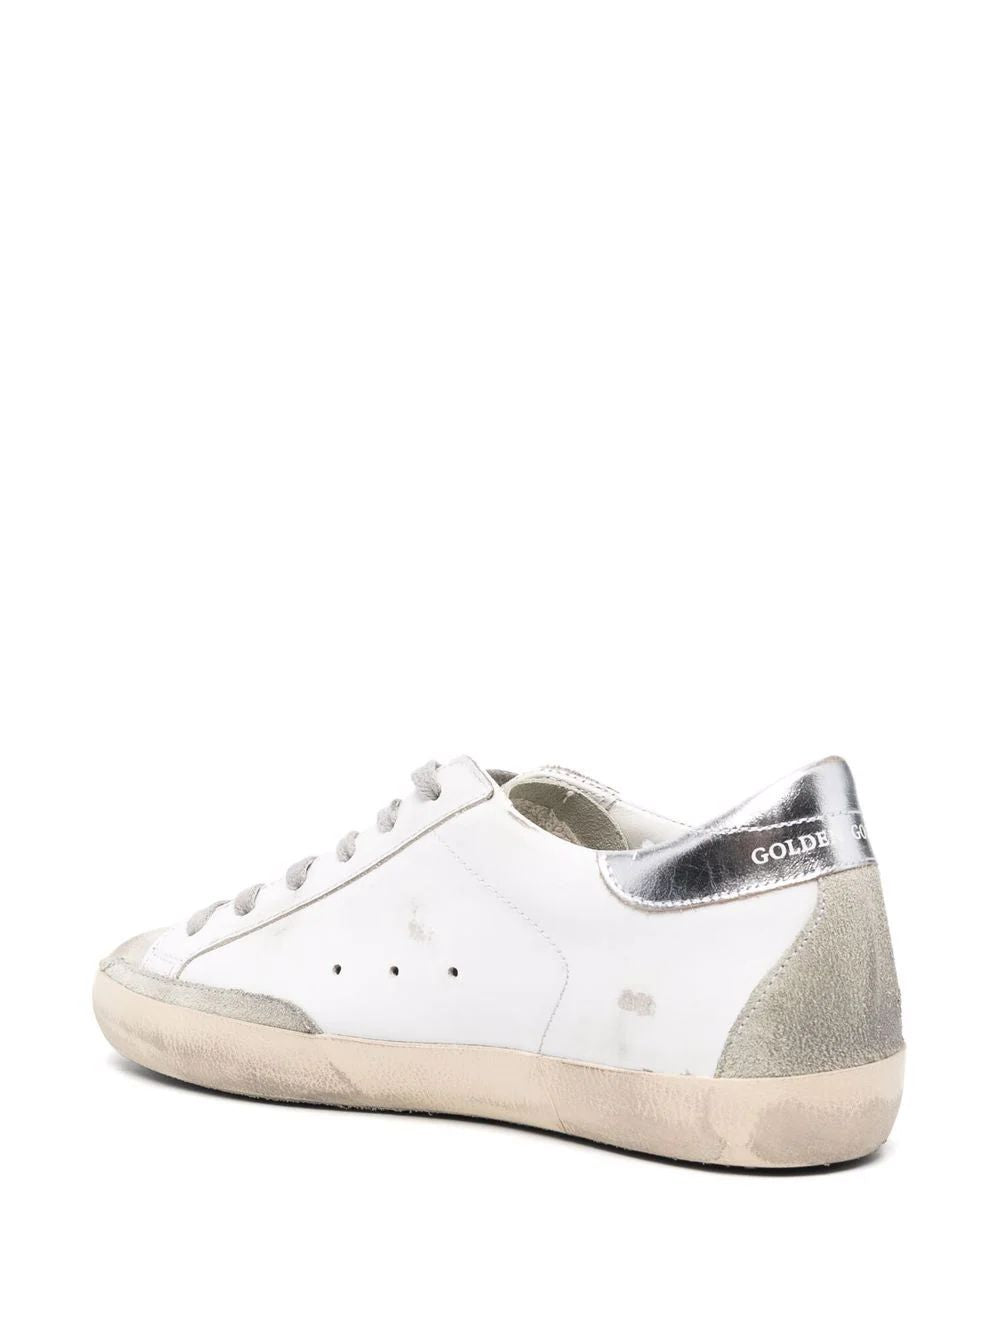 GOLDEN GOOSE Women's White Super-Star Low-Top Sneakers with Iconic Star-Shaped Patch